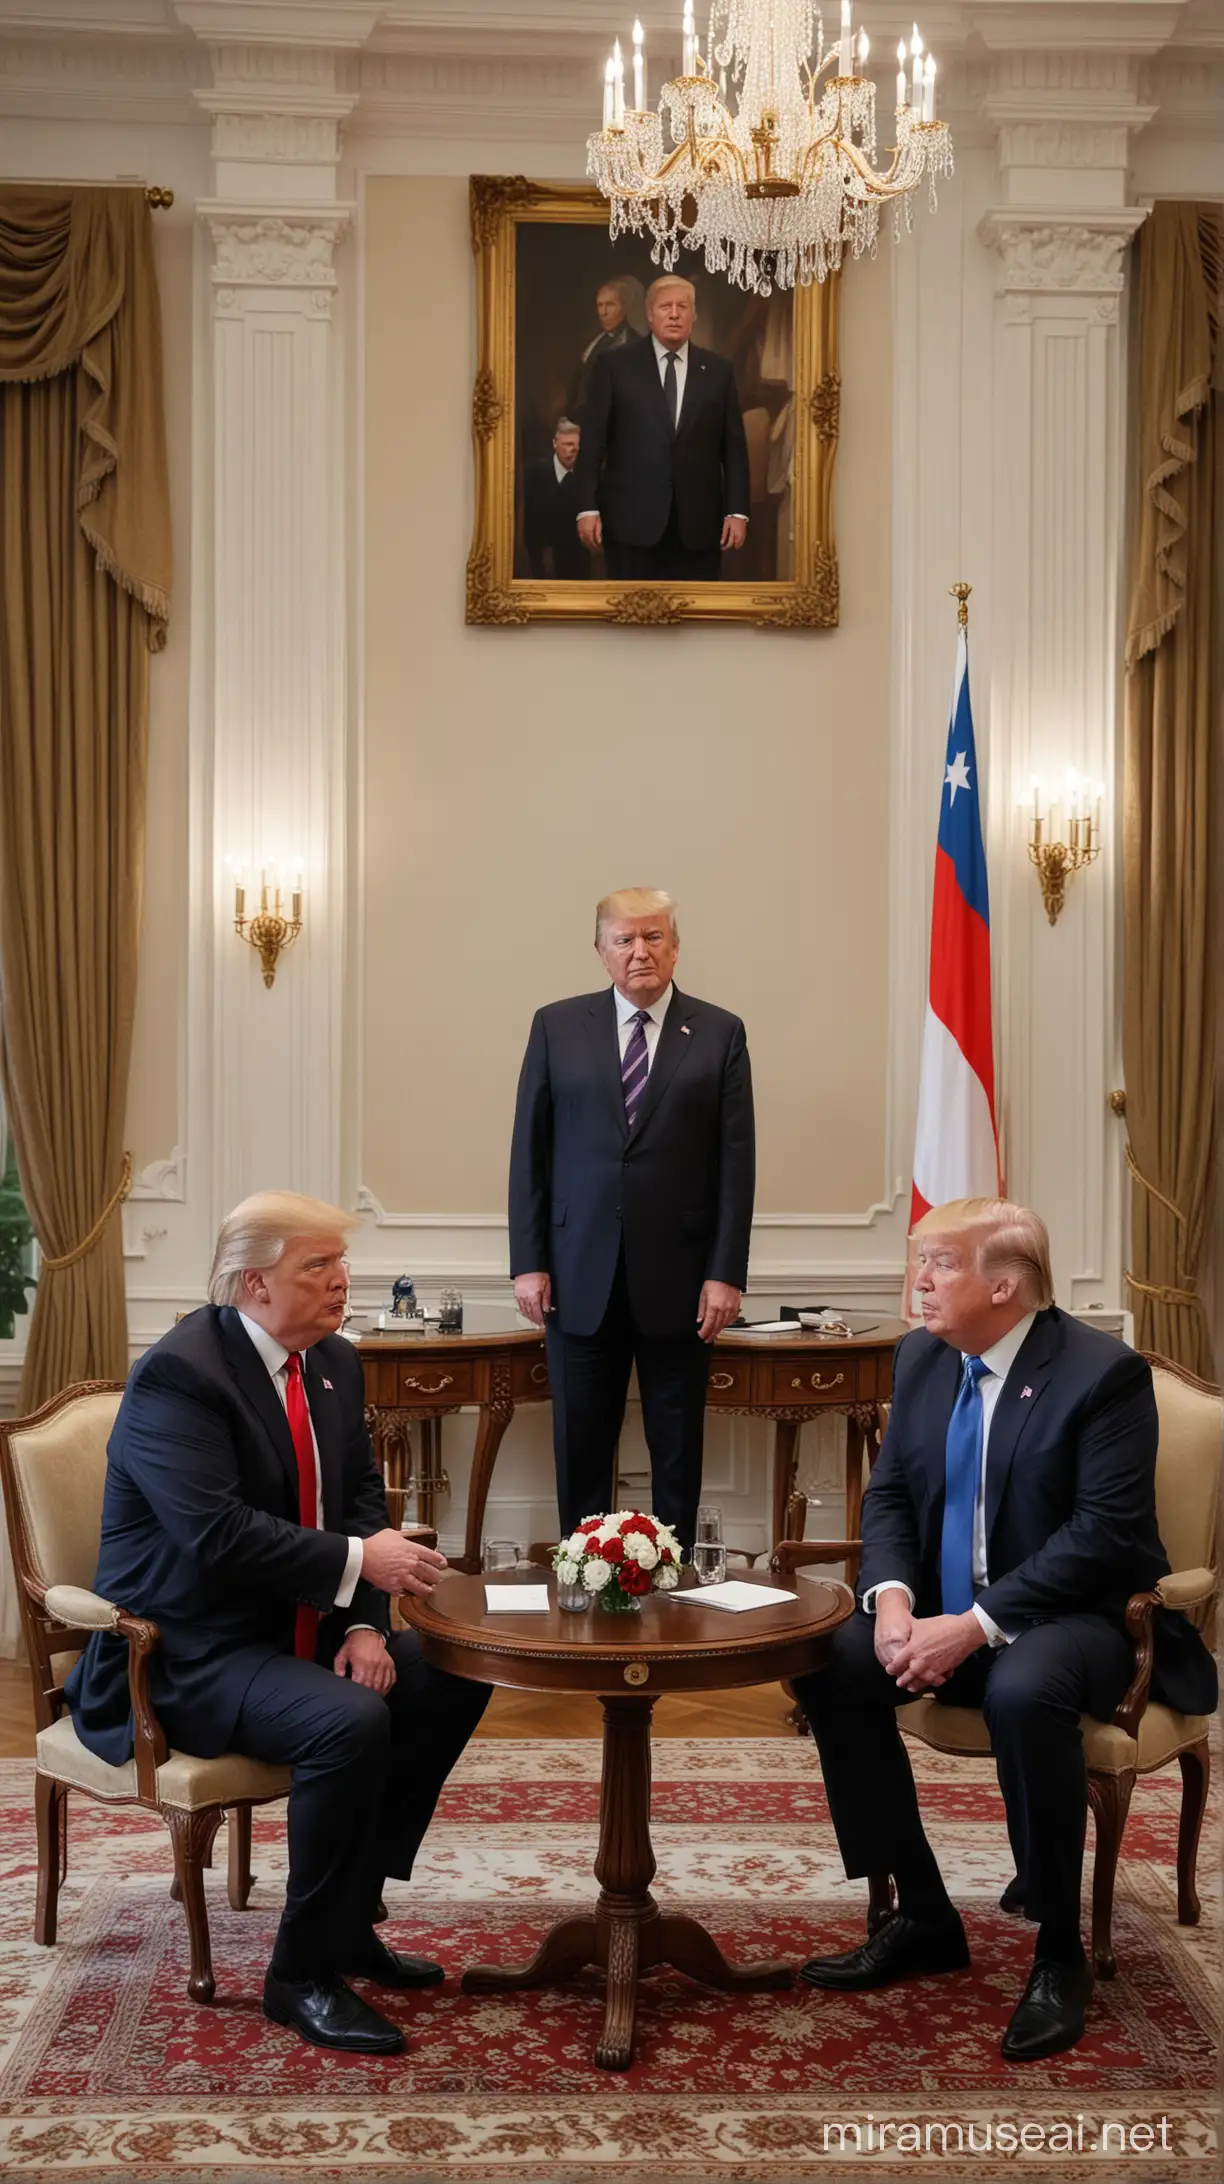 In this detailed and dignified scene, former President Donald Trump is depicted engaging in a diplomatic meeting with President Aleksandar Vučić of Serbia. The setting is a formal and elegant environment, reflecting the importance of international relations and diplomacy. Make Aleksandra realistic 